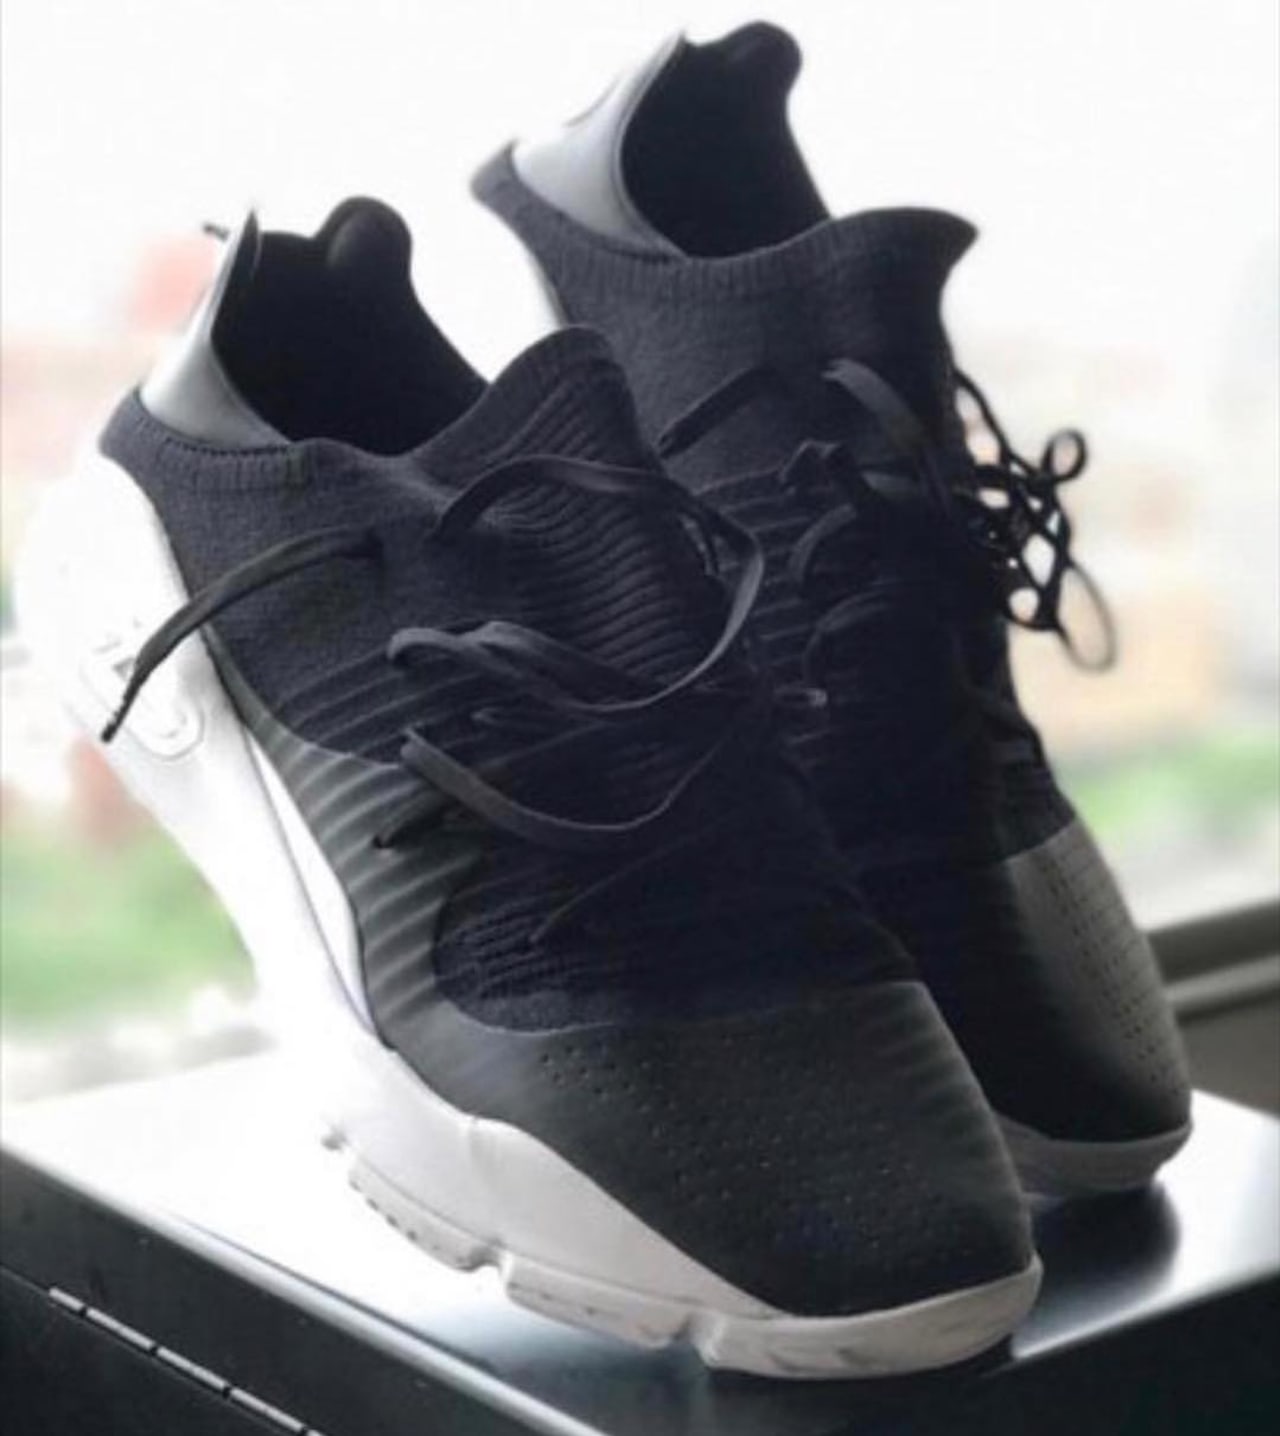 Under Armour Curry 4 Low in Black 